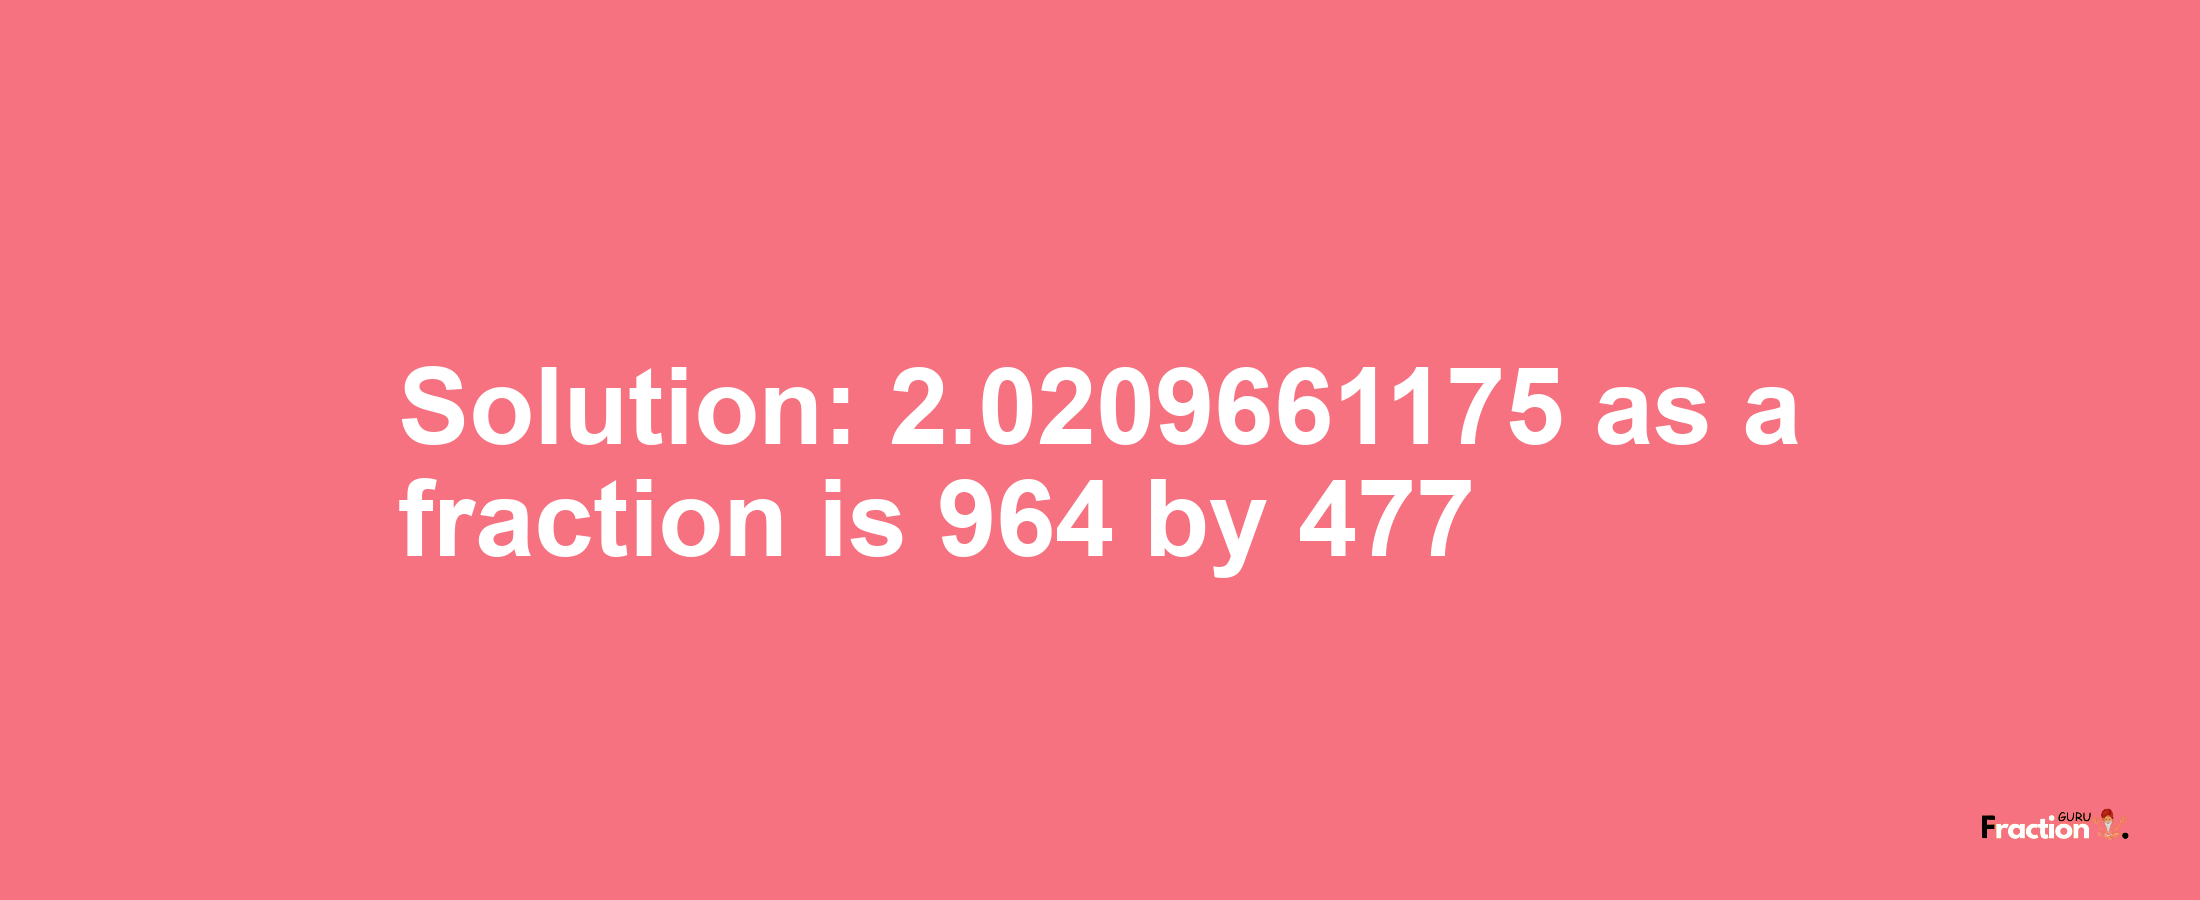 Solution:2.0209661175 as a fraction is 964/477